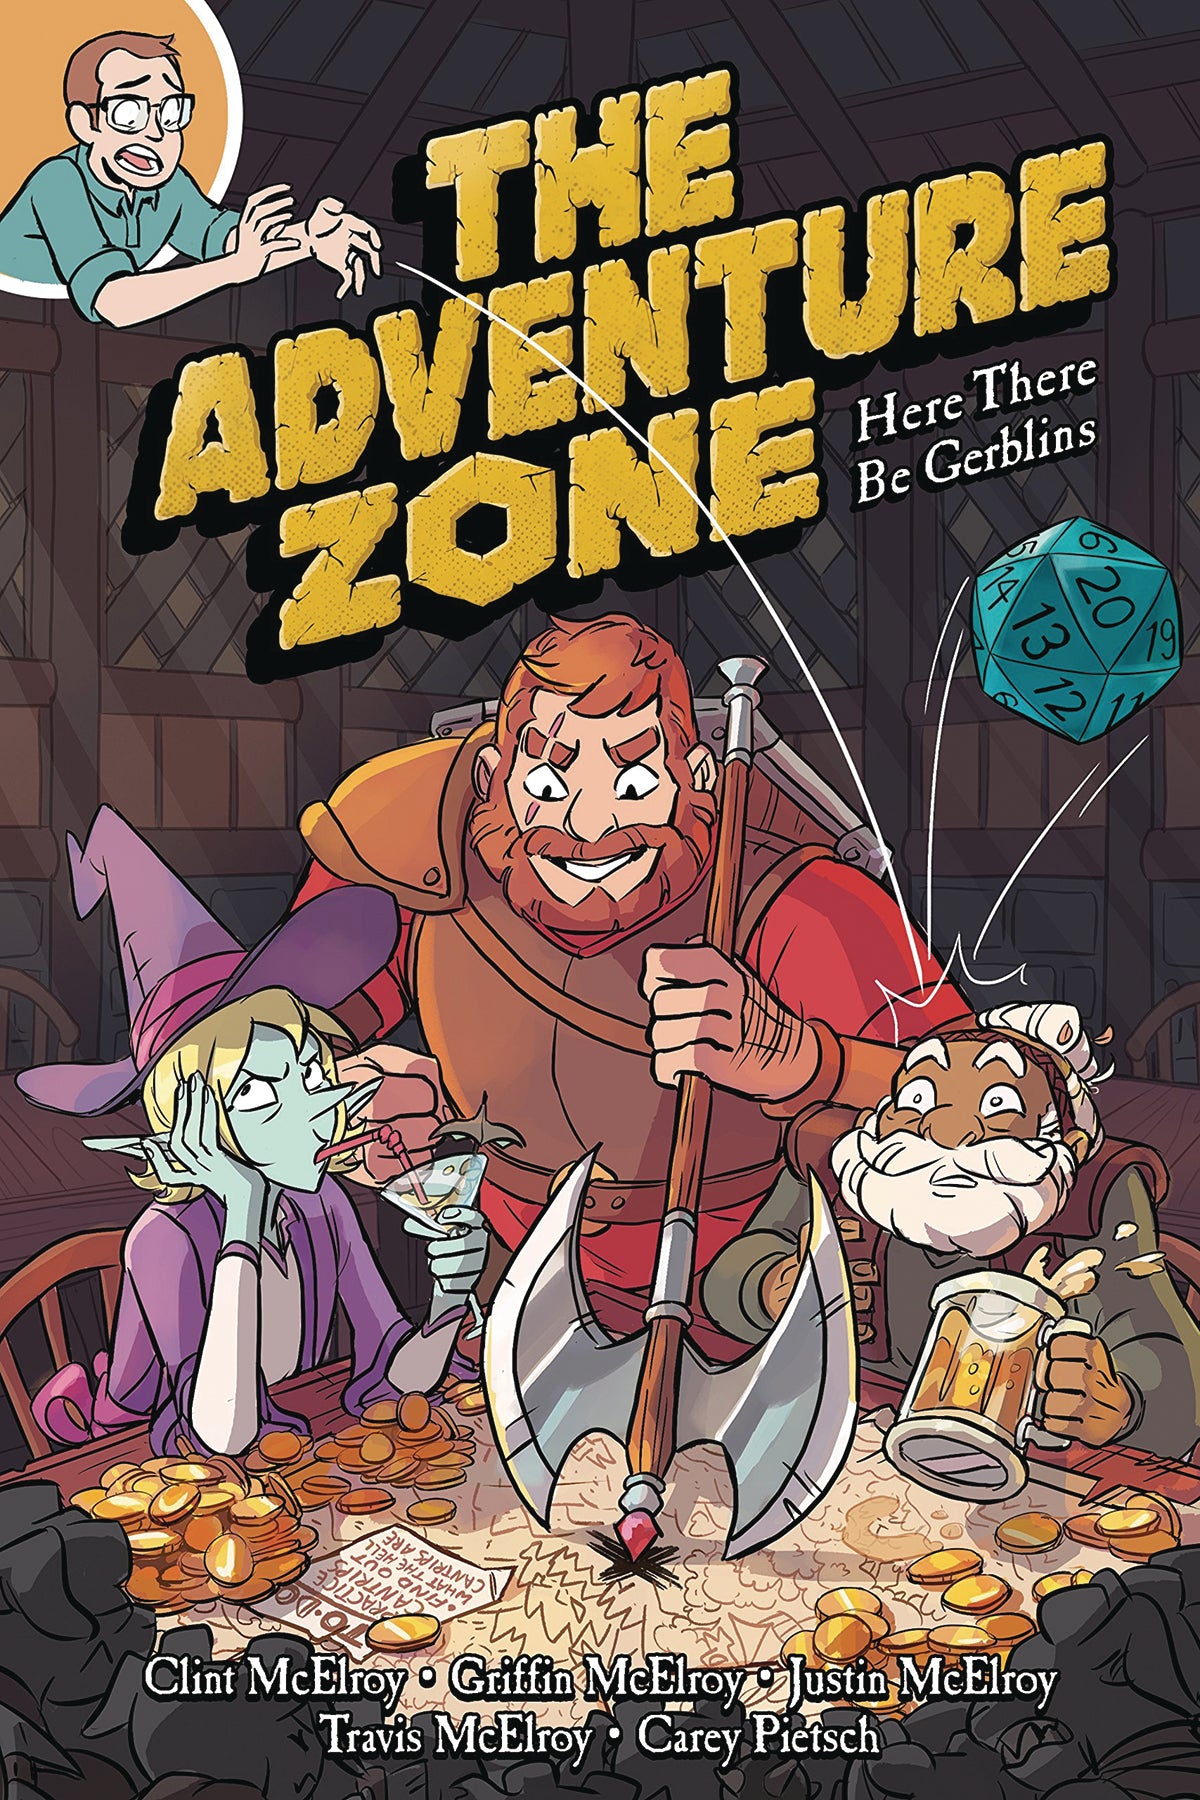 ADVENTURE ZONE GN VOL 01 HERE THERE BE GERBLINS COVER